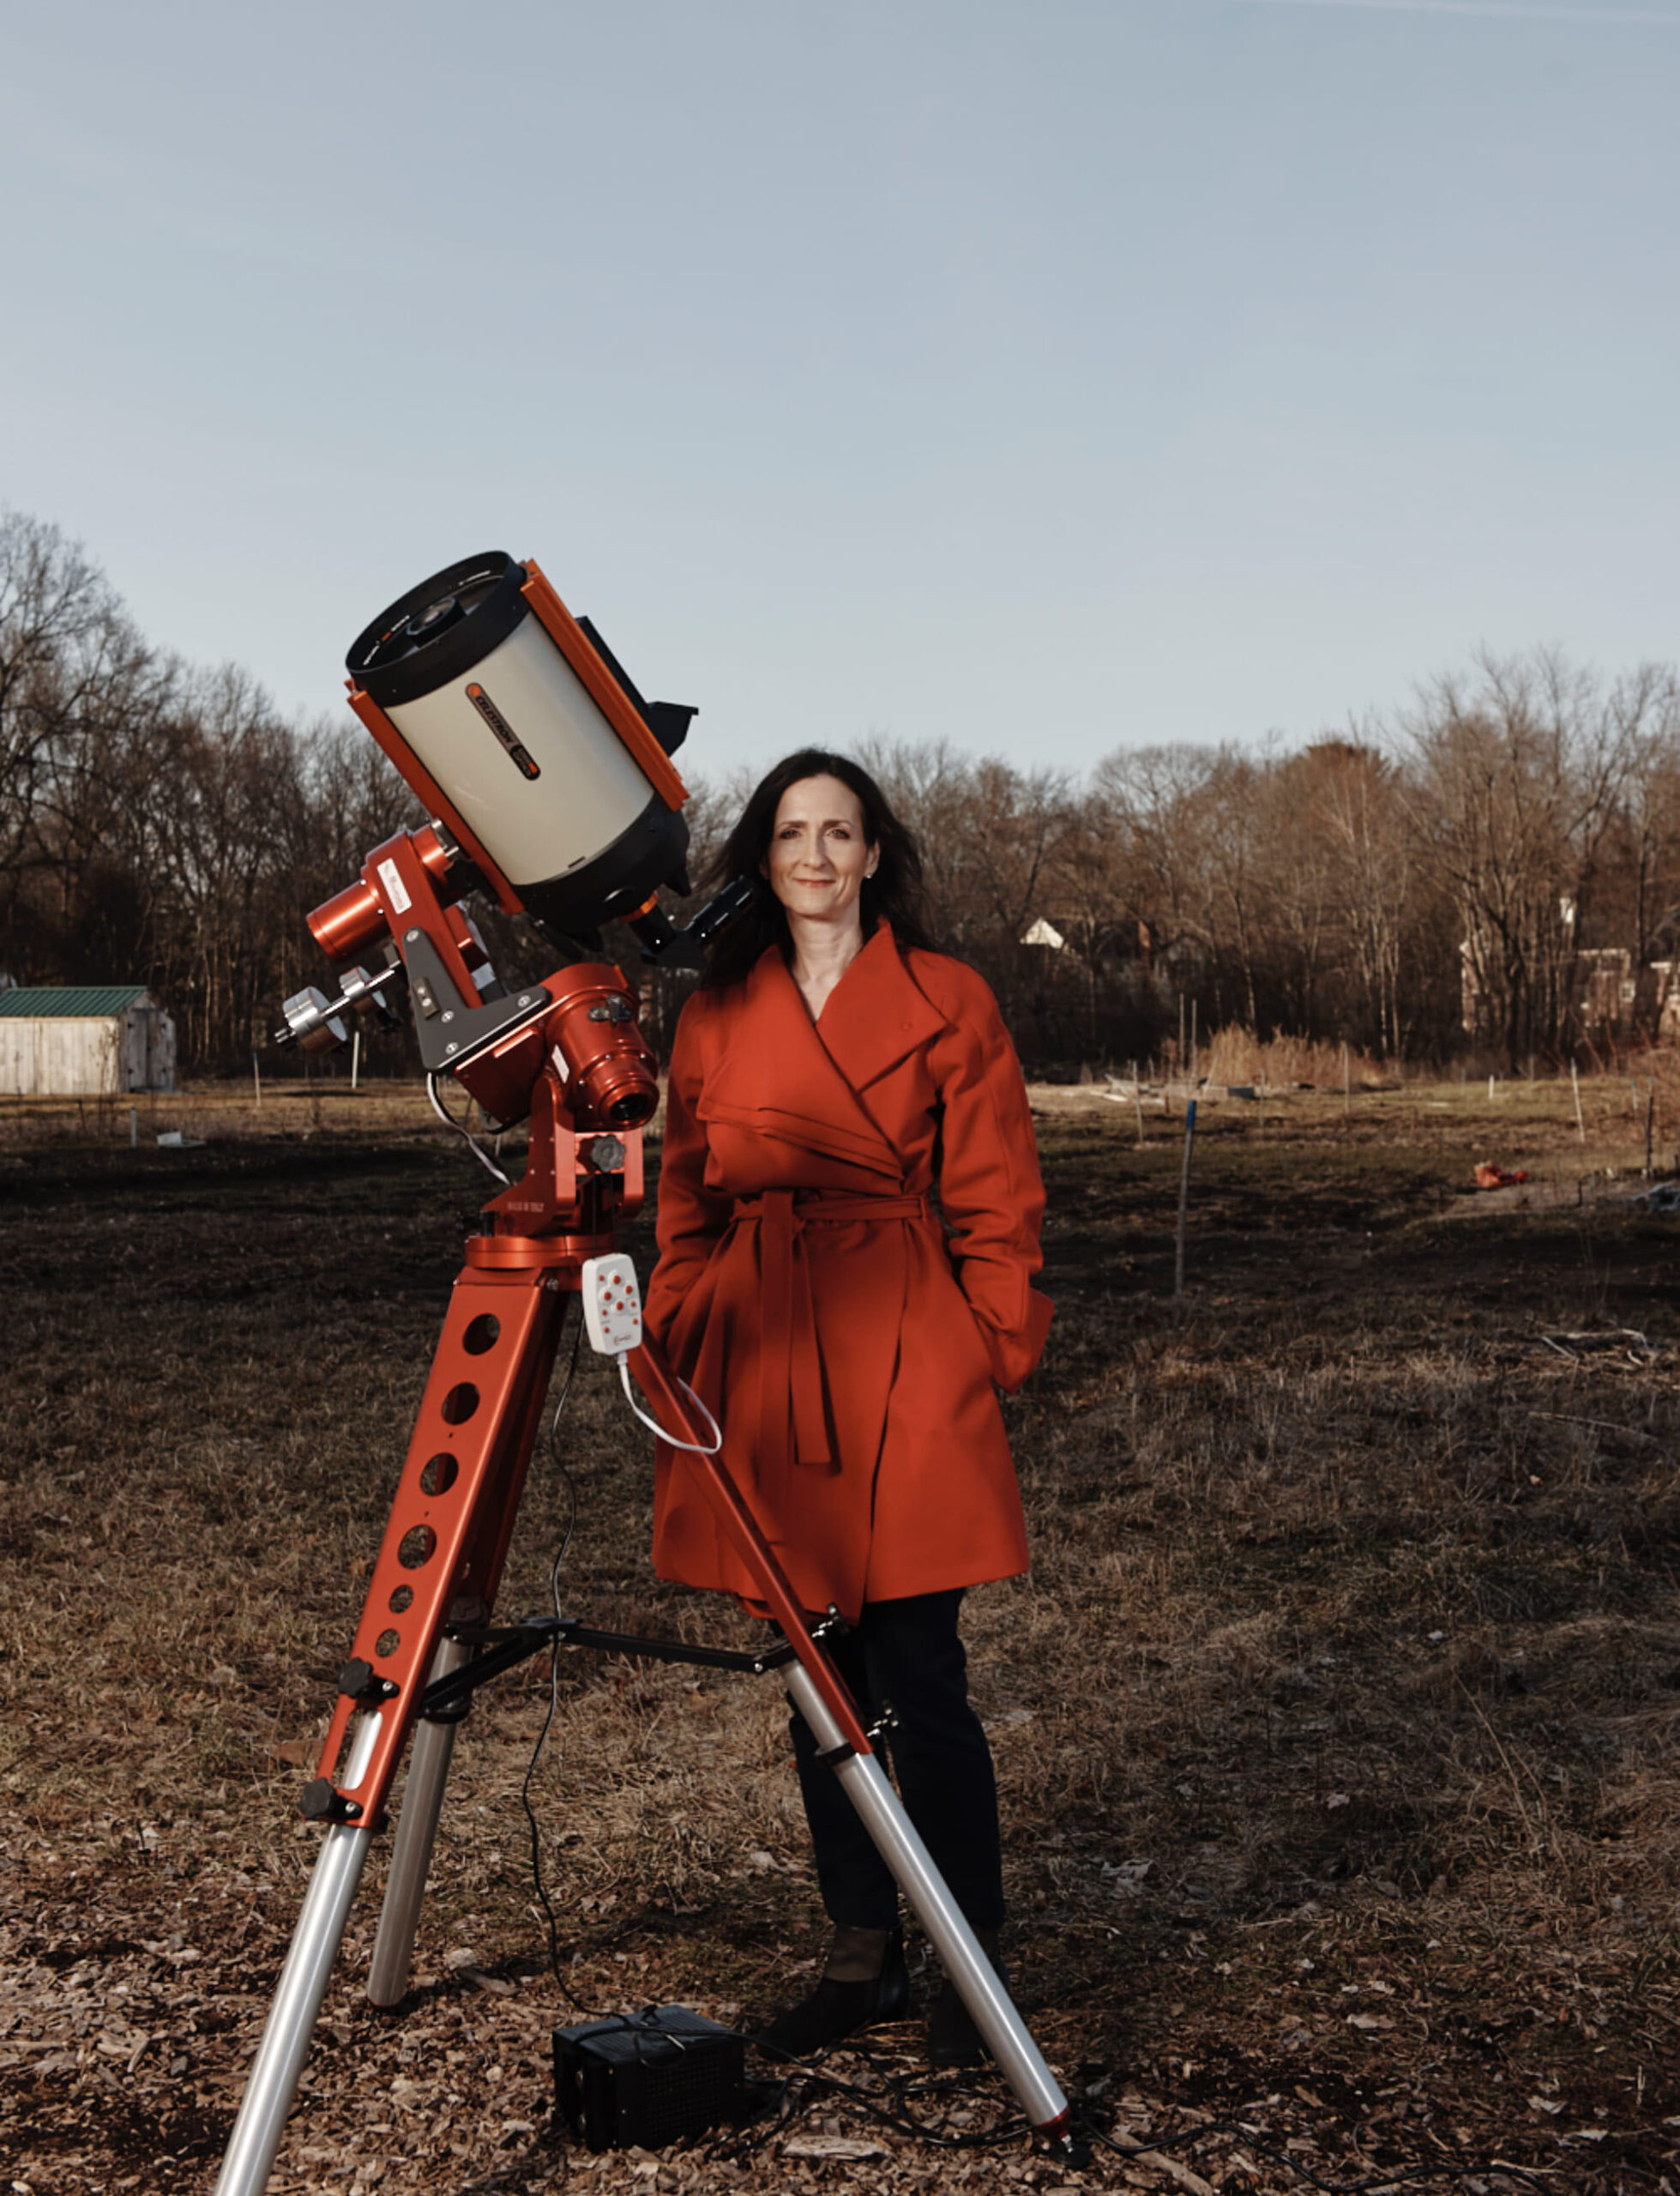 A woman with dark hair wearing a red coat stands next to a telescope in a field. The sky is blue, and there are trees in the distance behind her